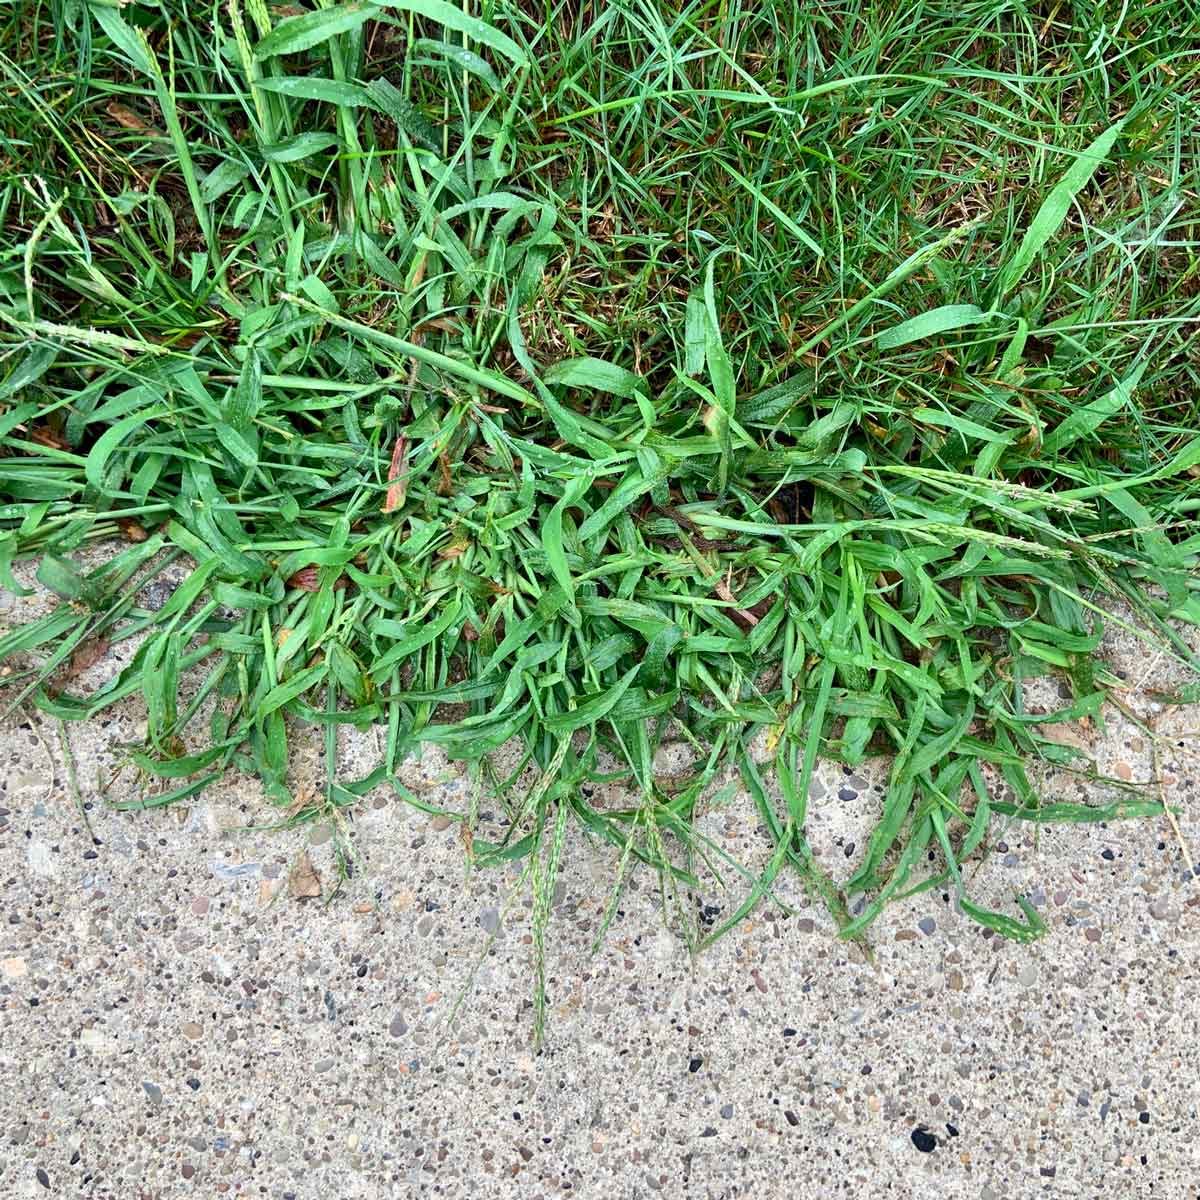 How To Get Rid of Crabgrass